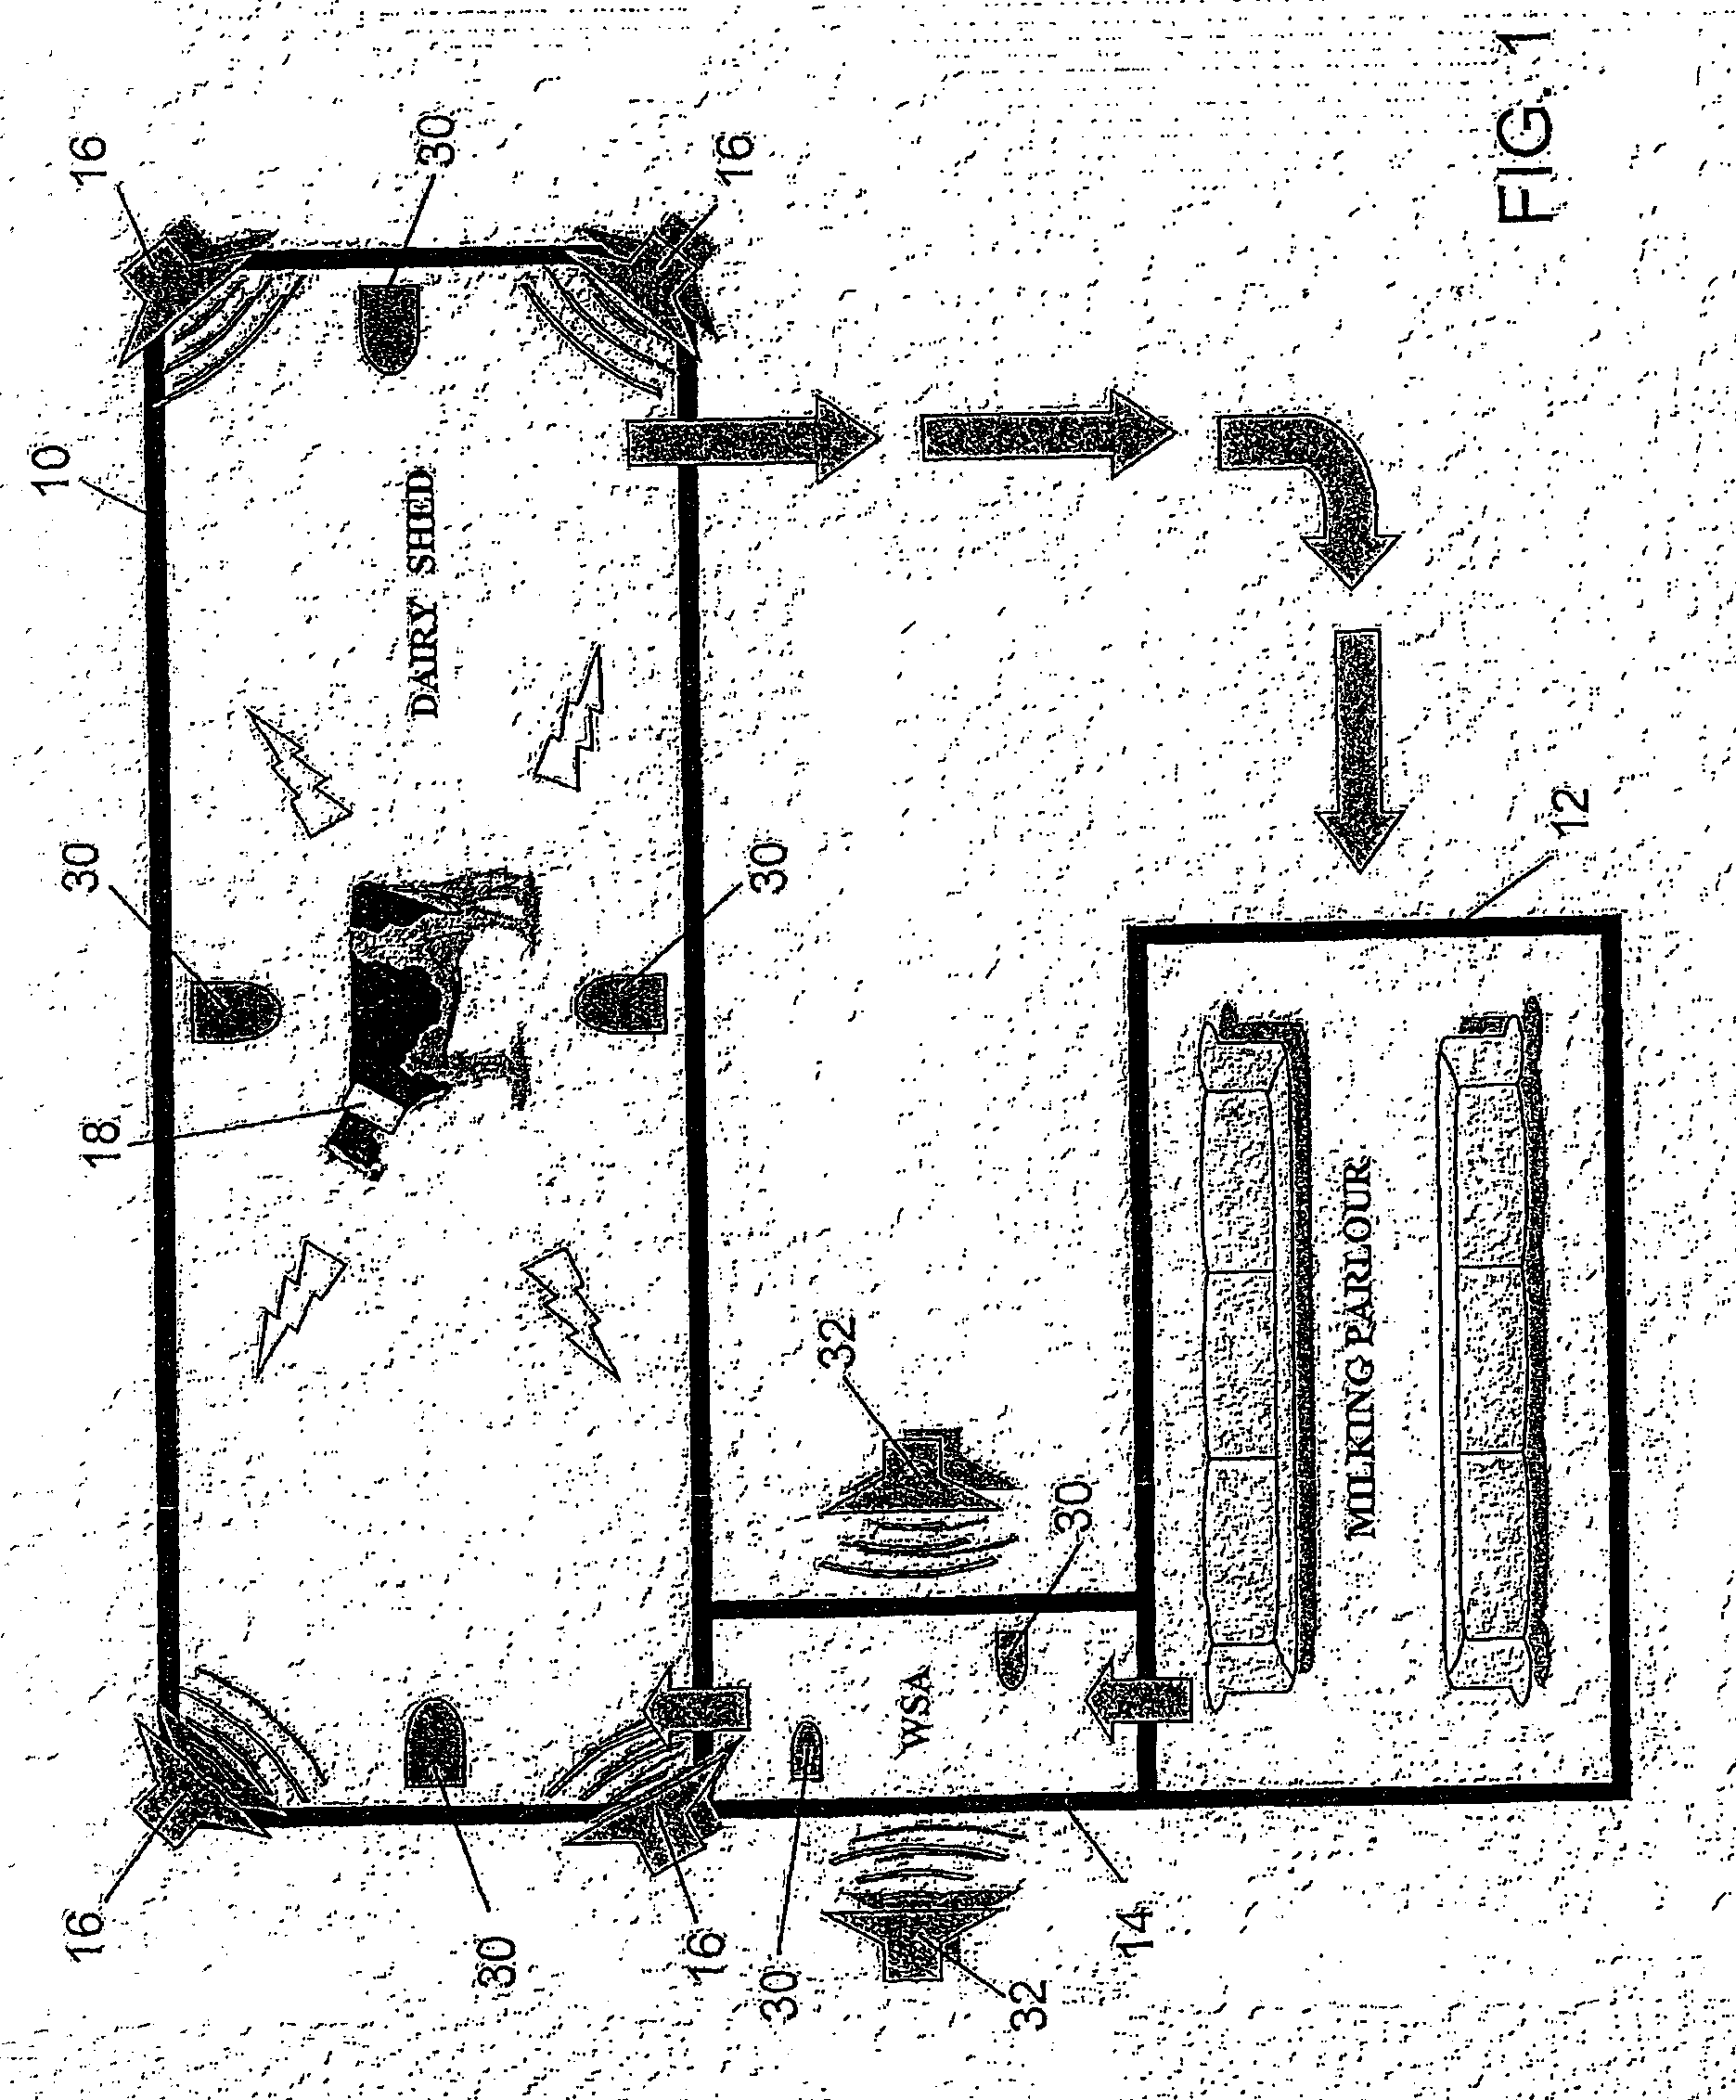 Animal monitoring system and method